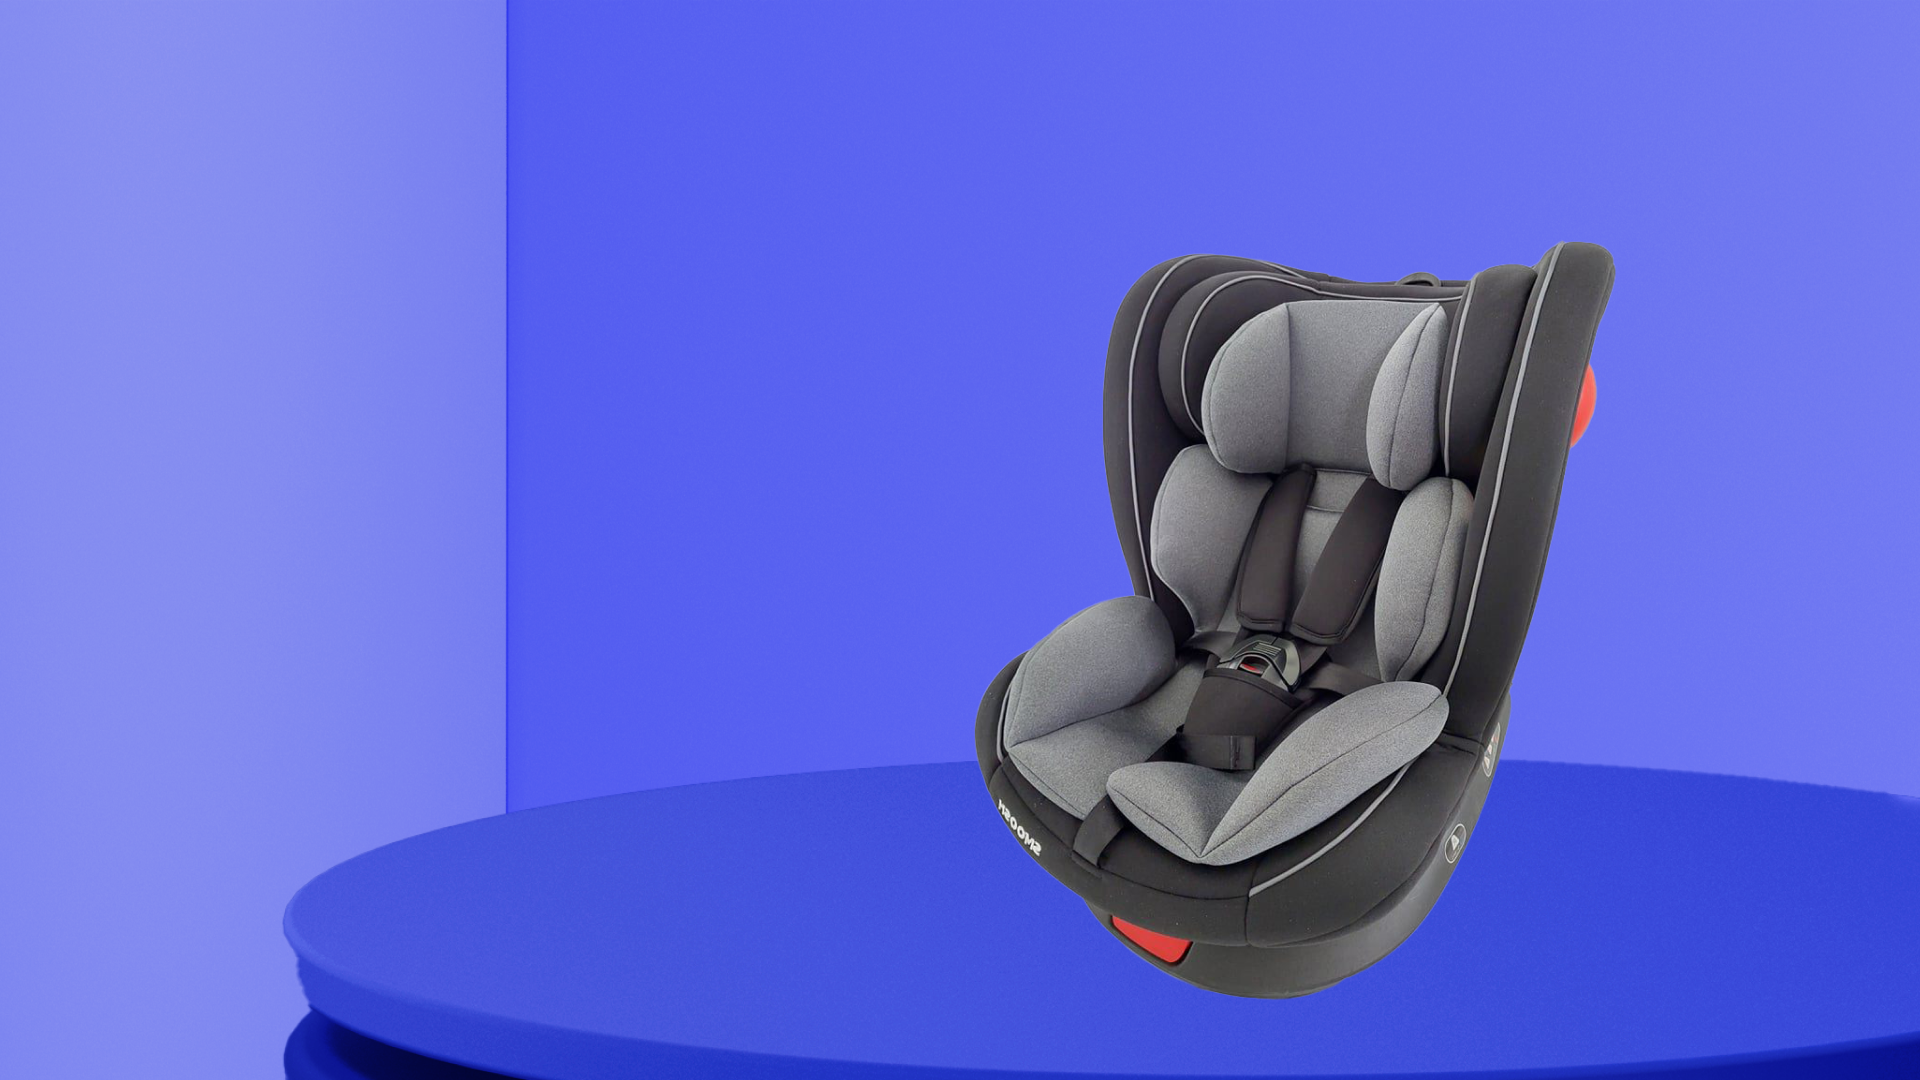 Child car seat safety. Image shows a car seat on a blue background